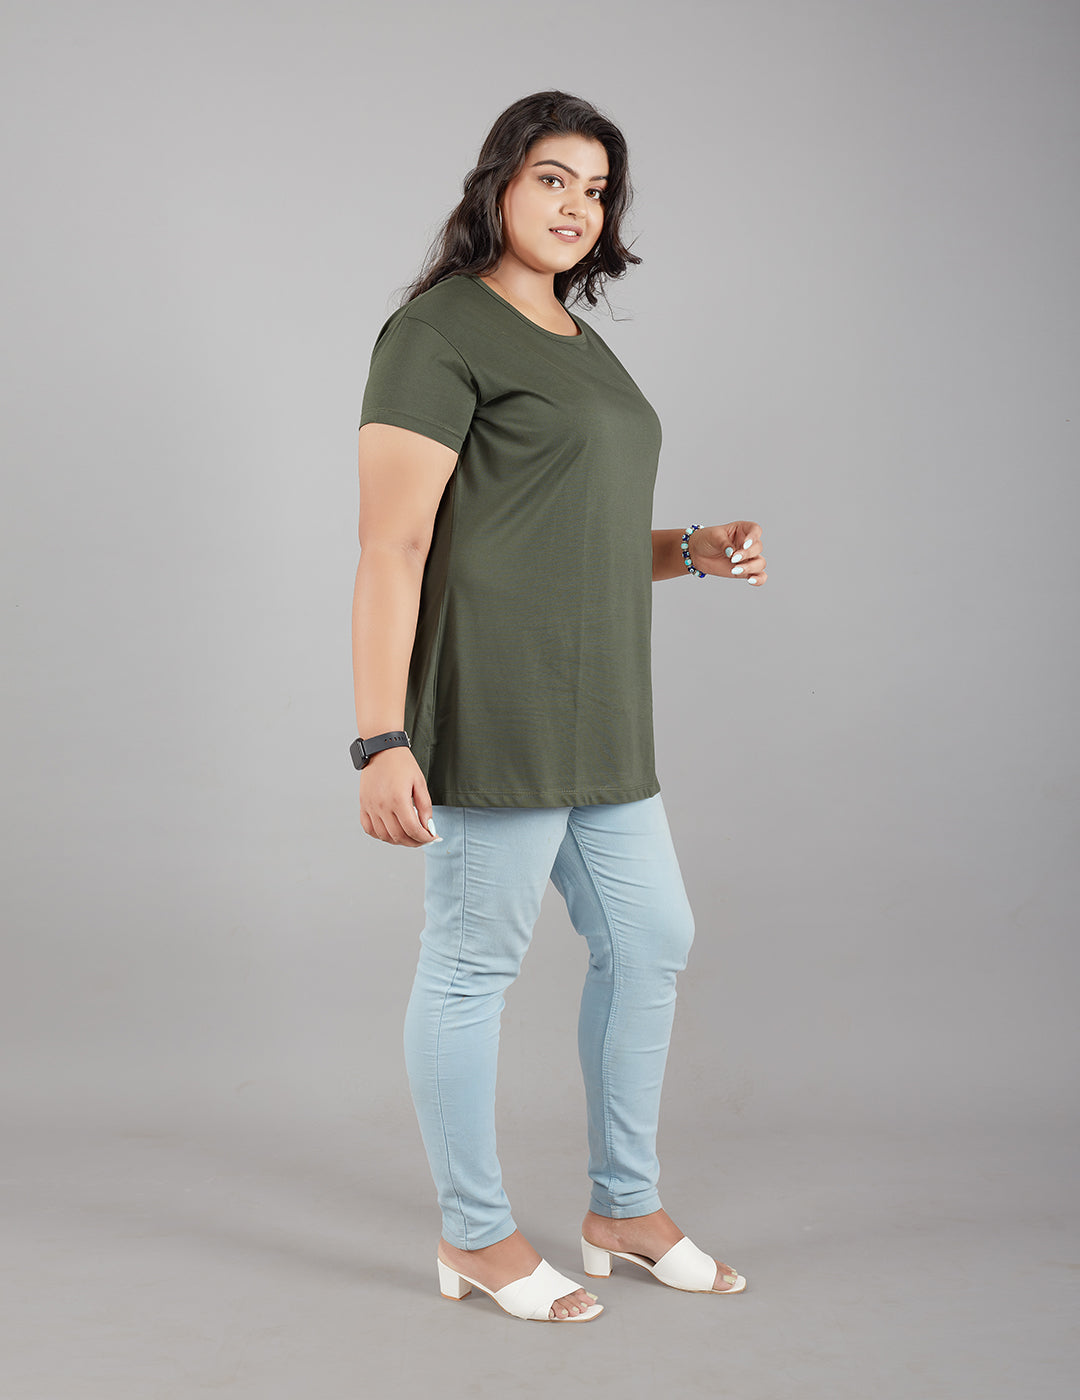 Plus Size Plain Cotton T-shirt For Women - Olive Green At Best Prices